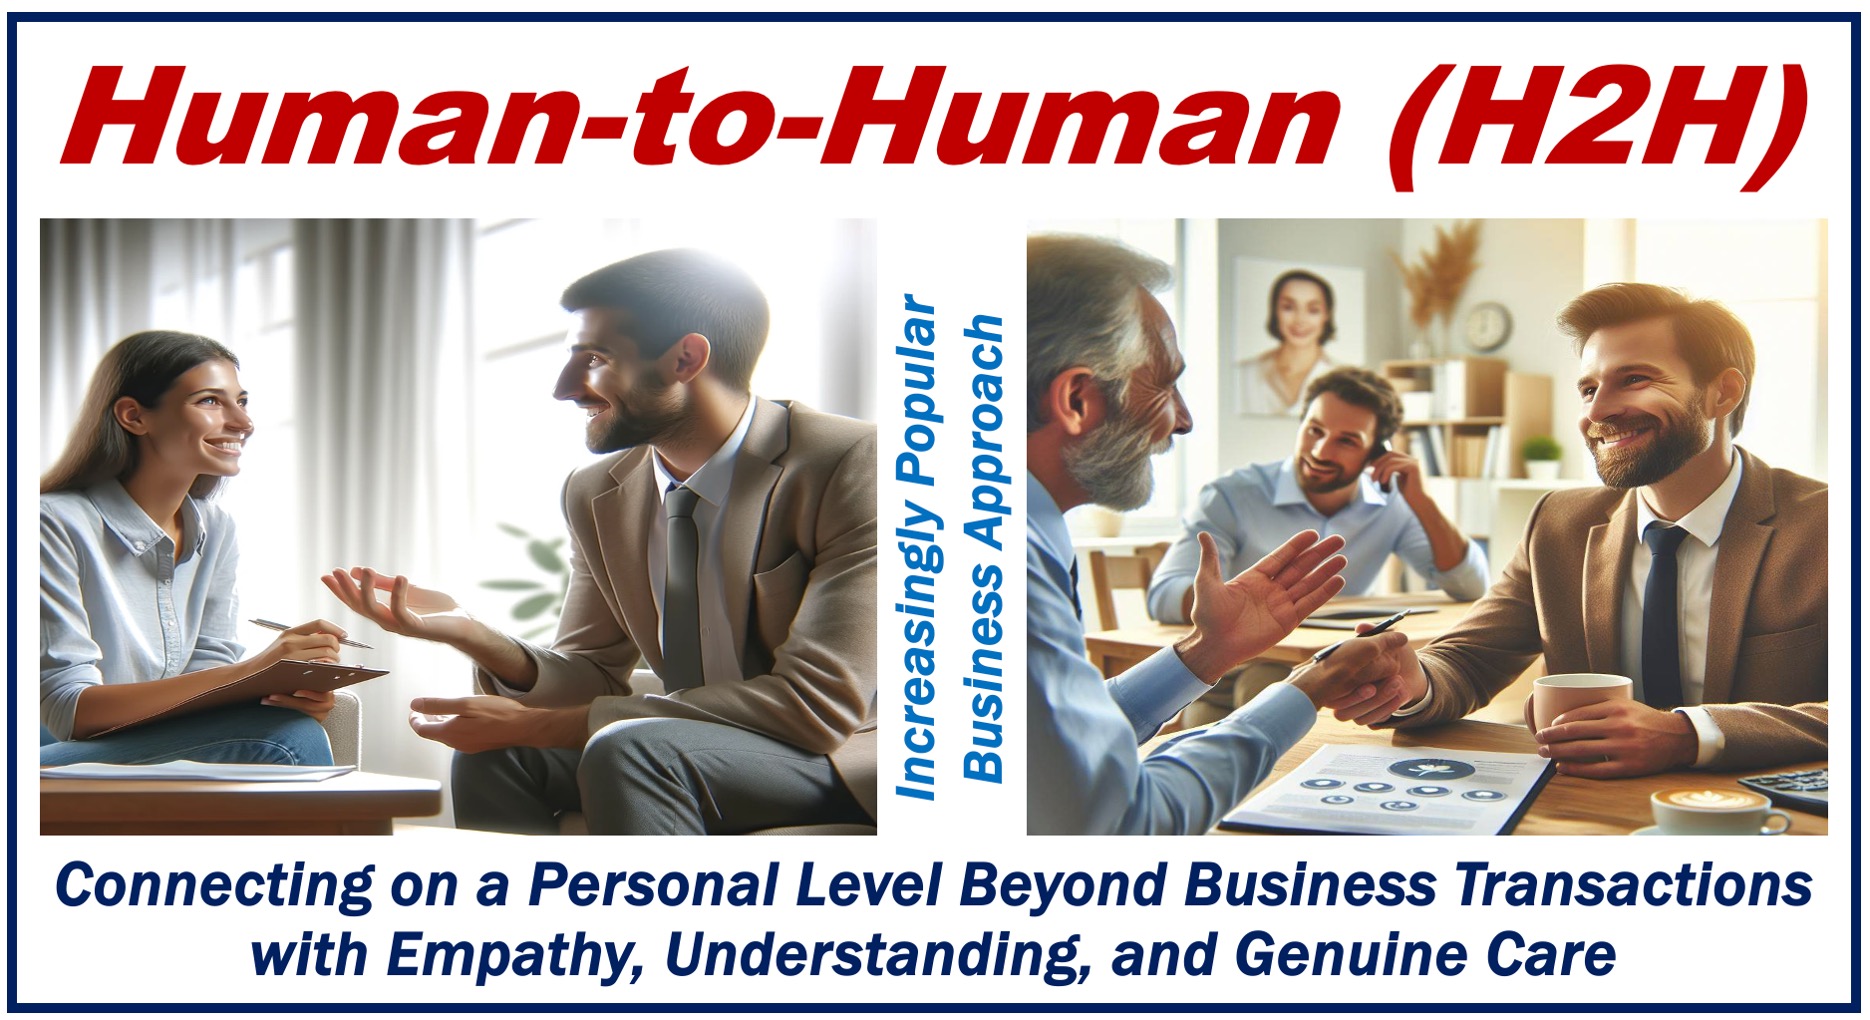 Image depicting concept of H2H or Human-to-Human, an approach that's popular in business today.